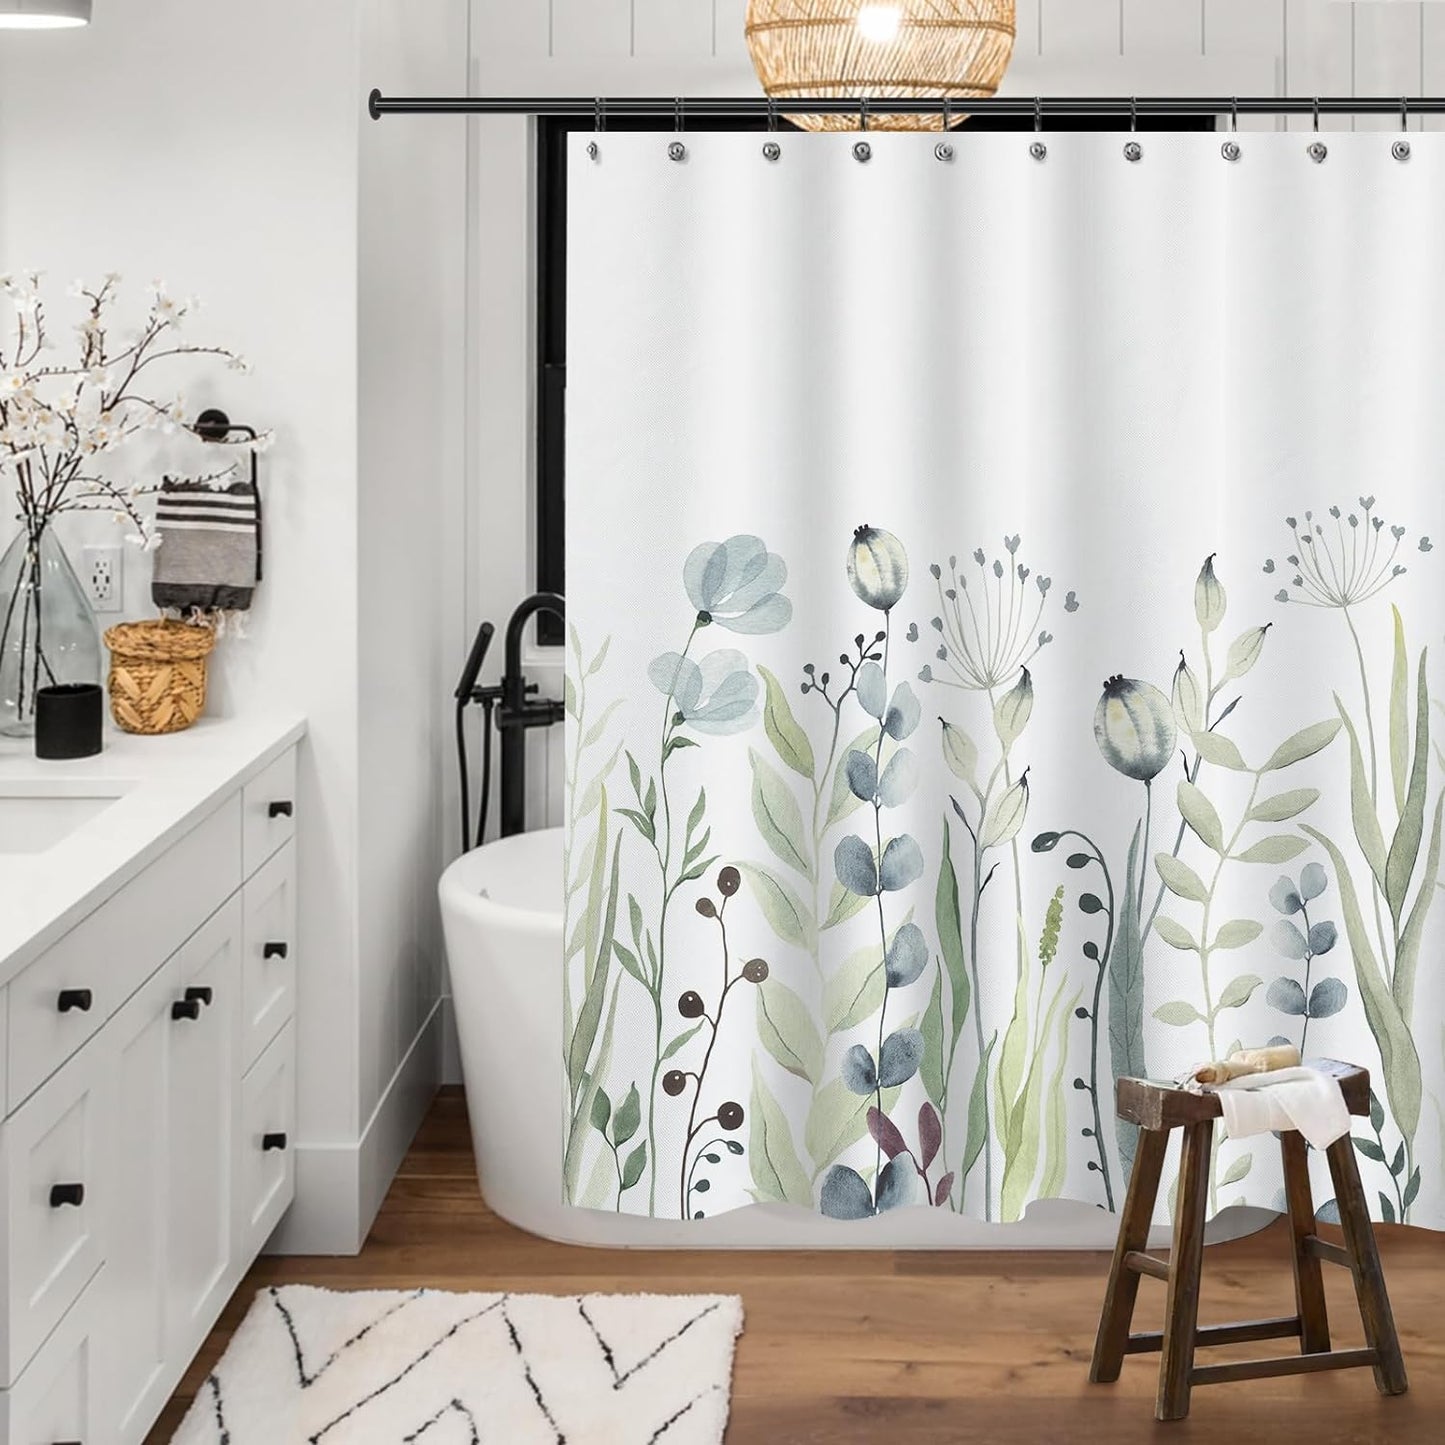 Floral Plant Fabric Shower Curtain, Spring Blue and Green Flower Shower Curtains for Home Decor, Botanical Bath Curtain for Bathroom Washable, 71x71